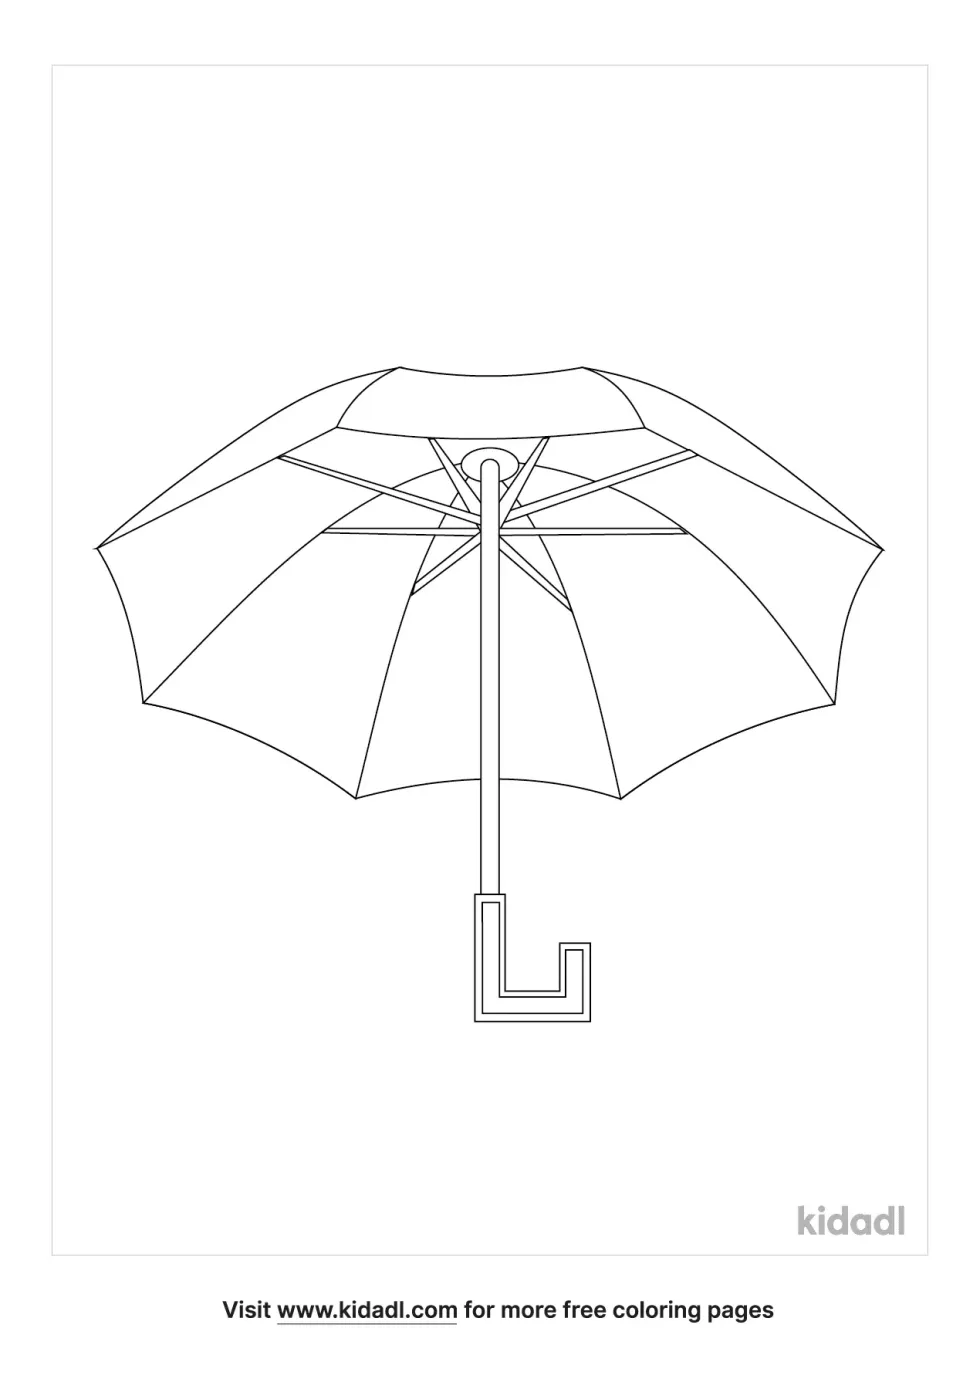 A coloring image showing a picture of a vintage umbrella from 1920's era